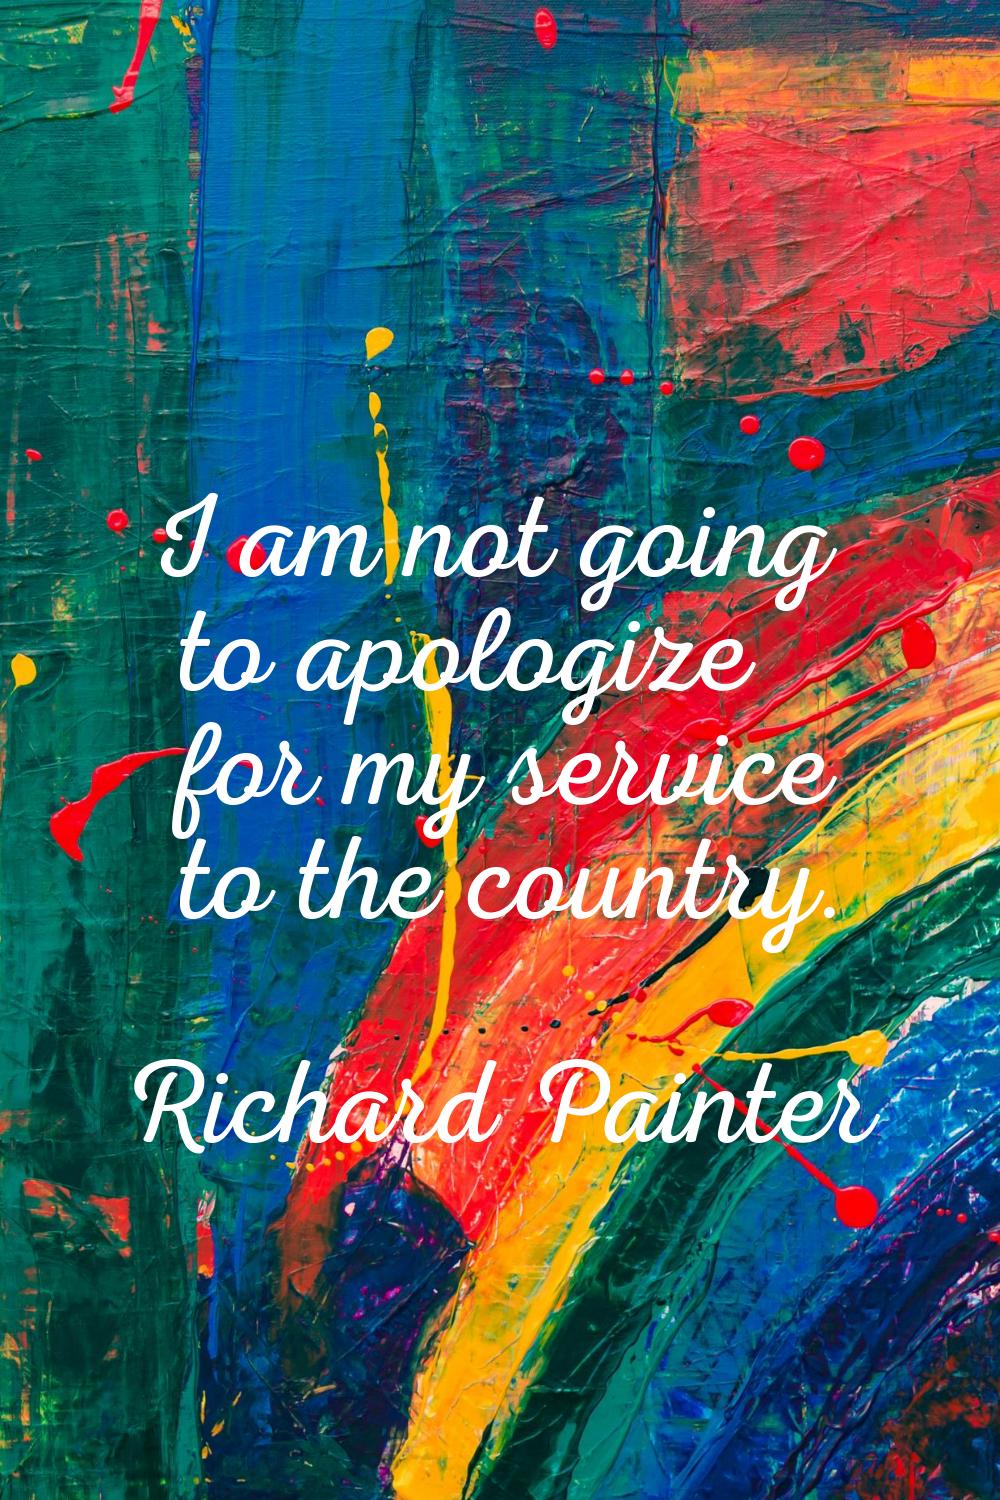 I am not going to apologize for my service to the country.